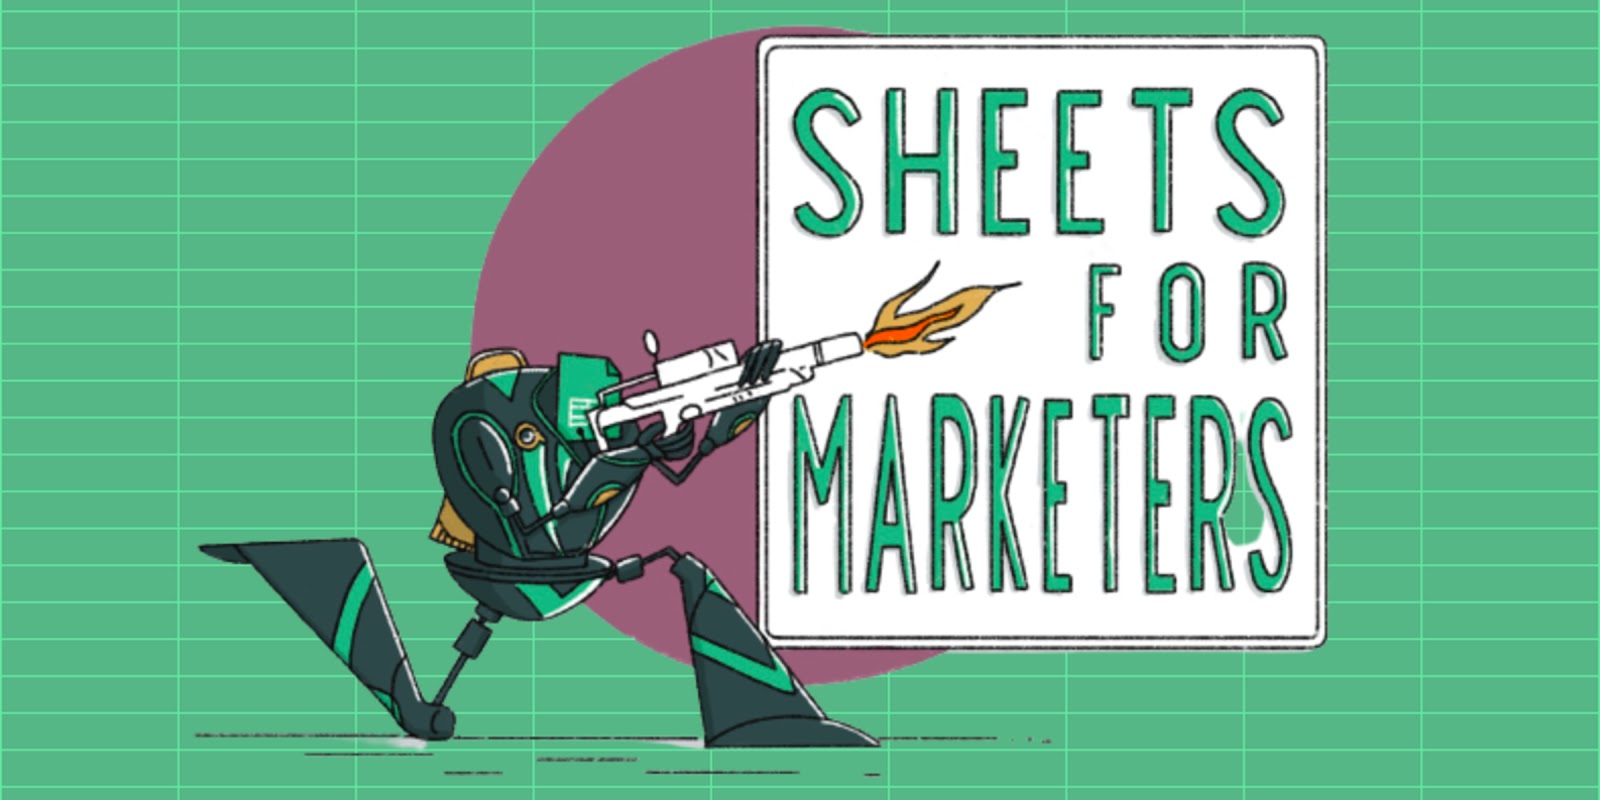 Sheets for Marketers // #1 Place for SEO Tools Built in Google Sheets